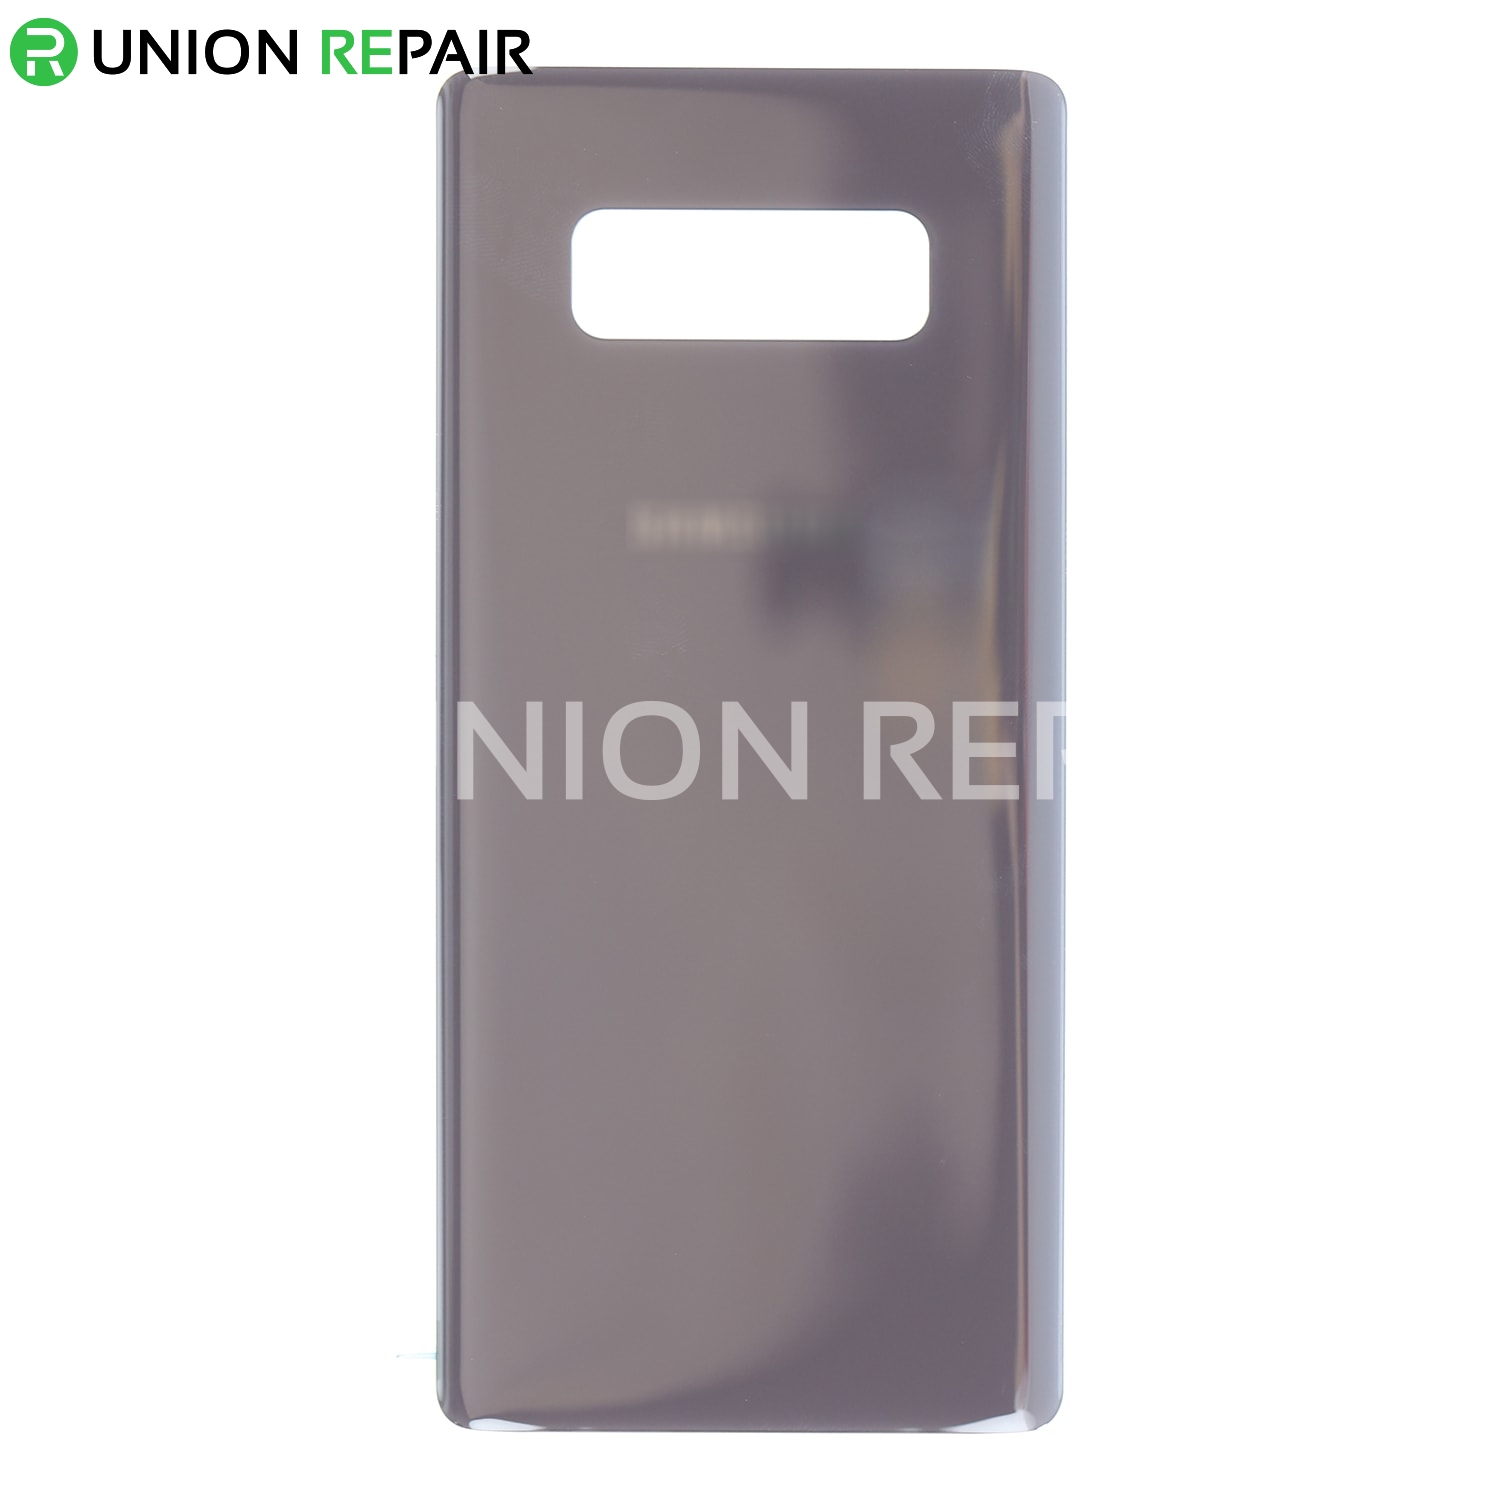 Replacement for Samsung Galaxy Note 8 SM-N950 Back Cover - Orchid Grey